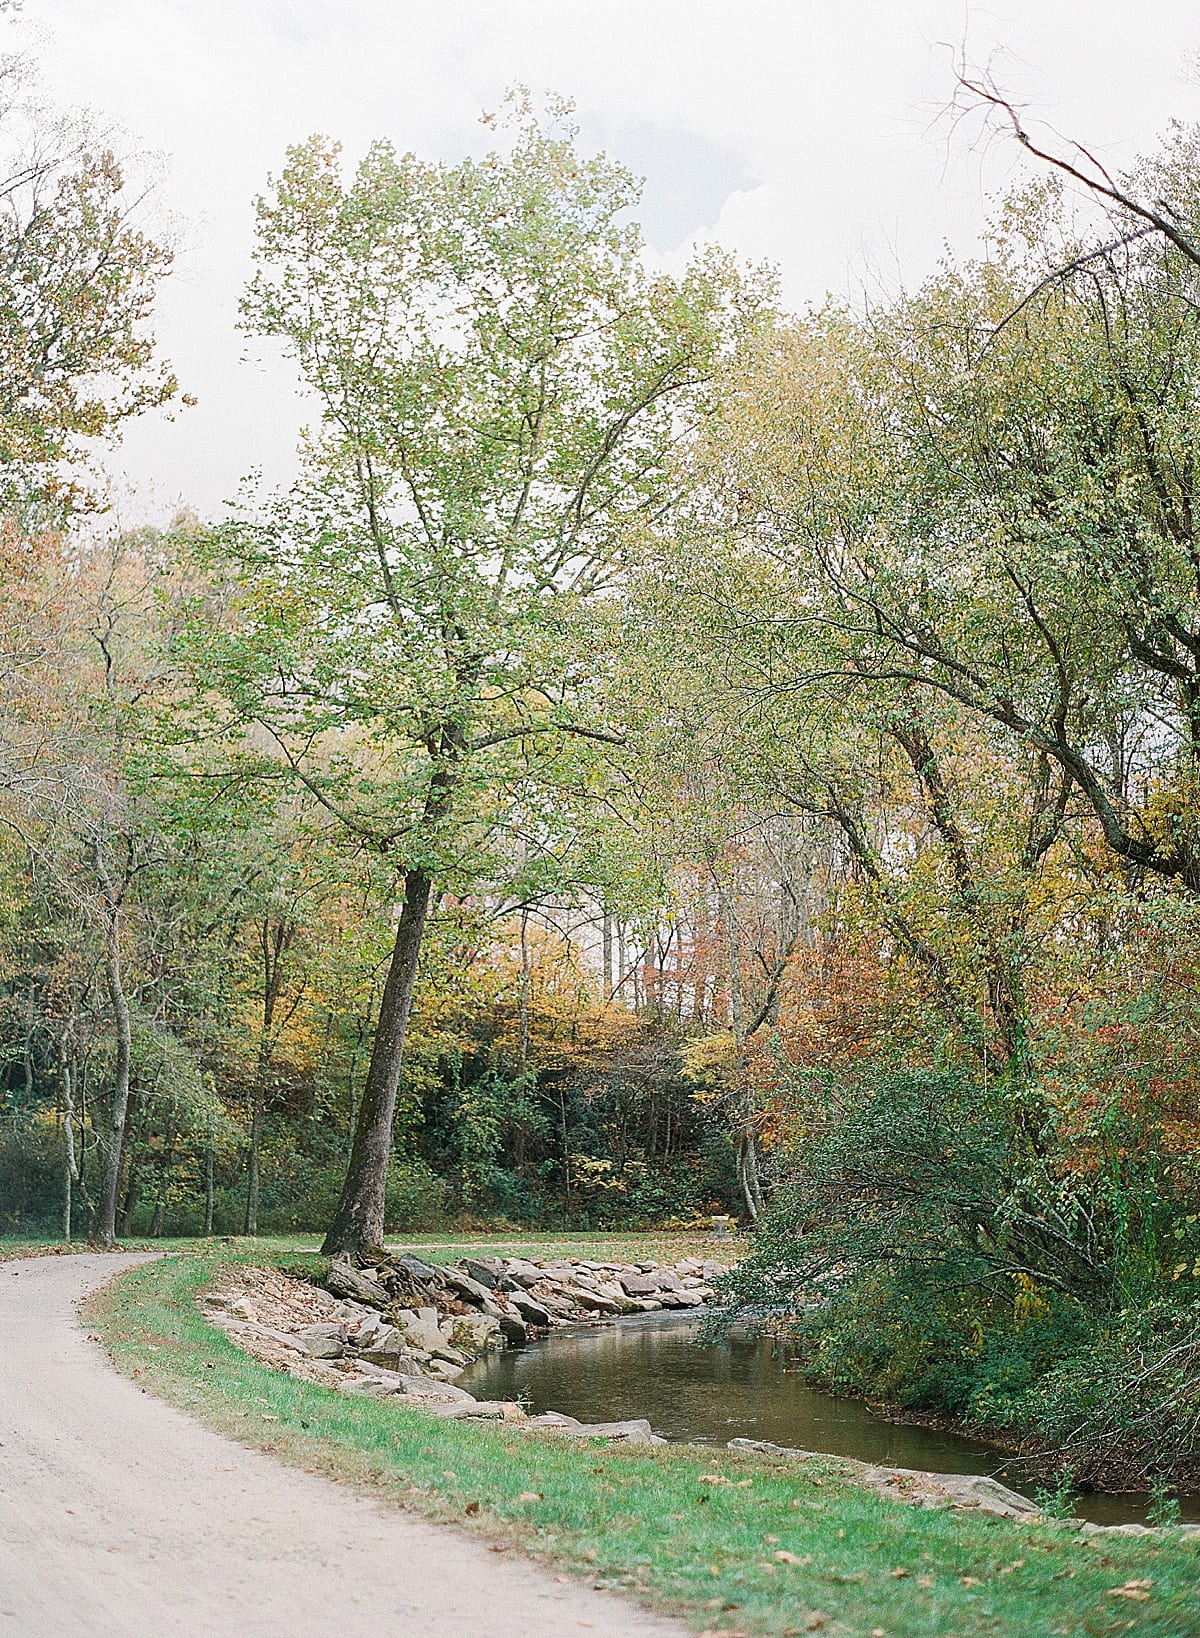 Winding Road with River Next to It Photo